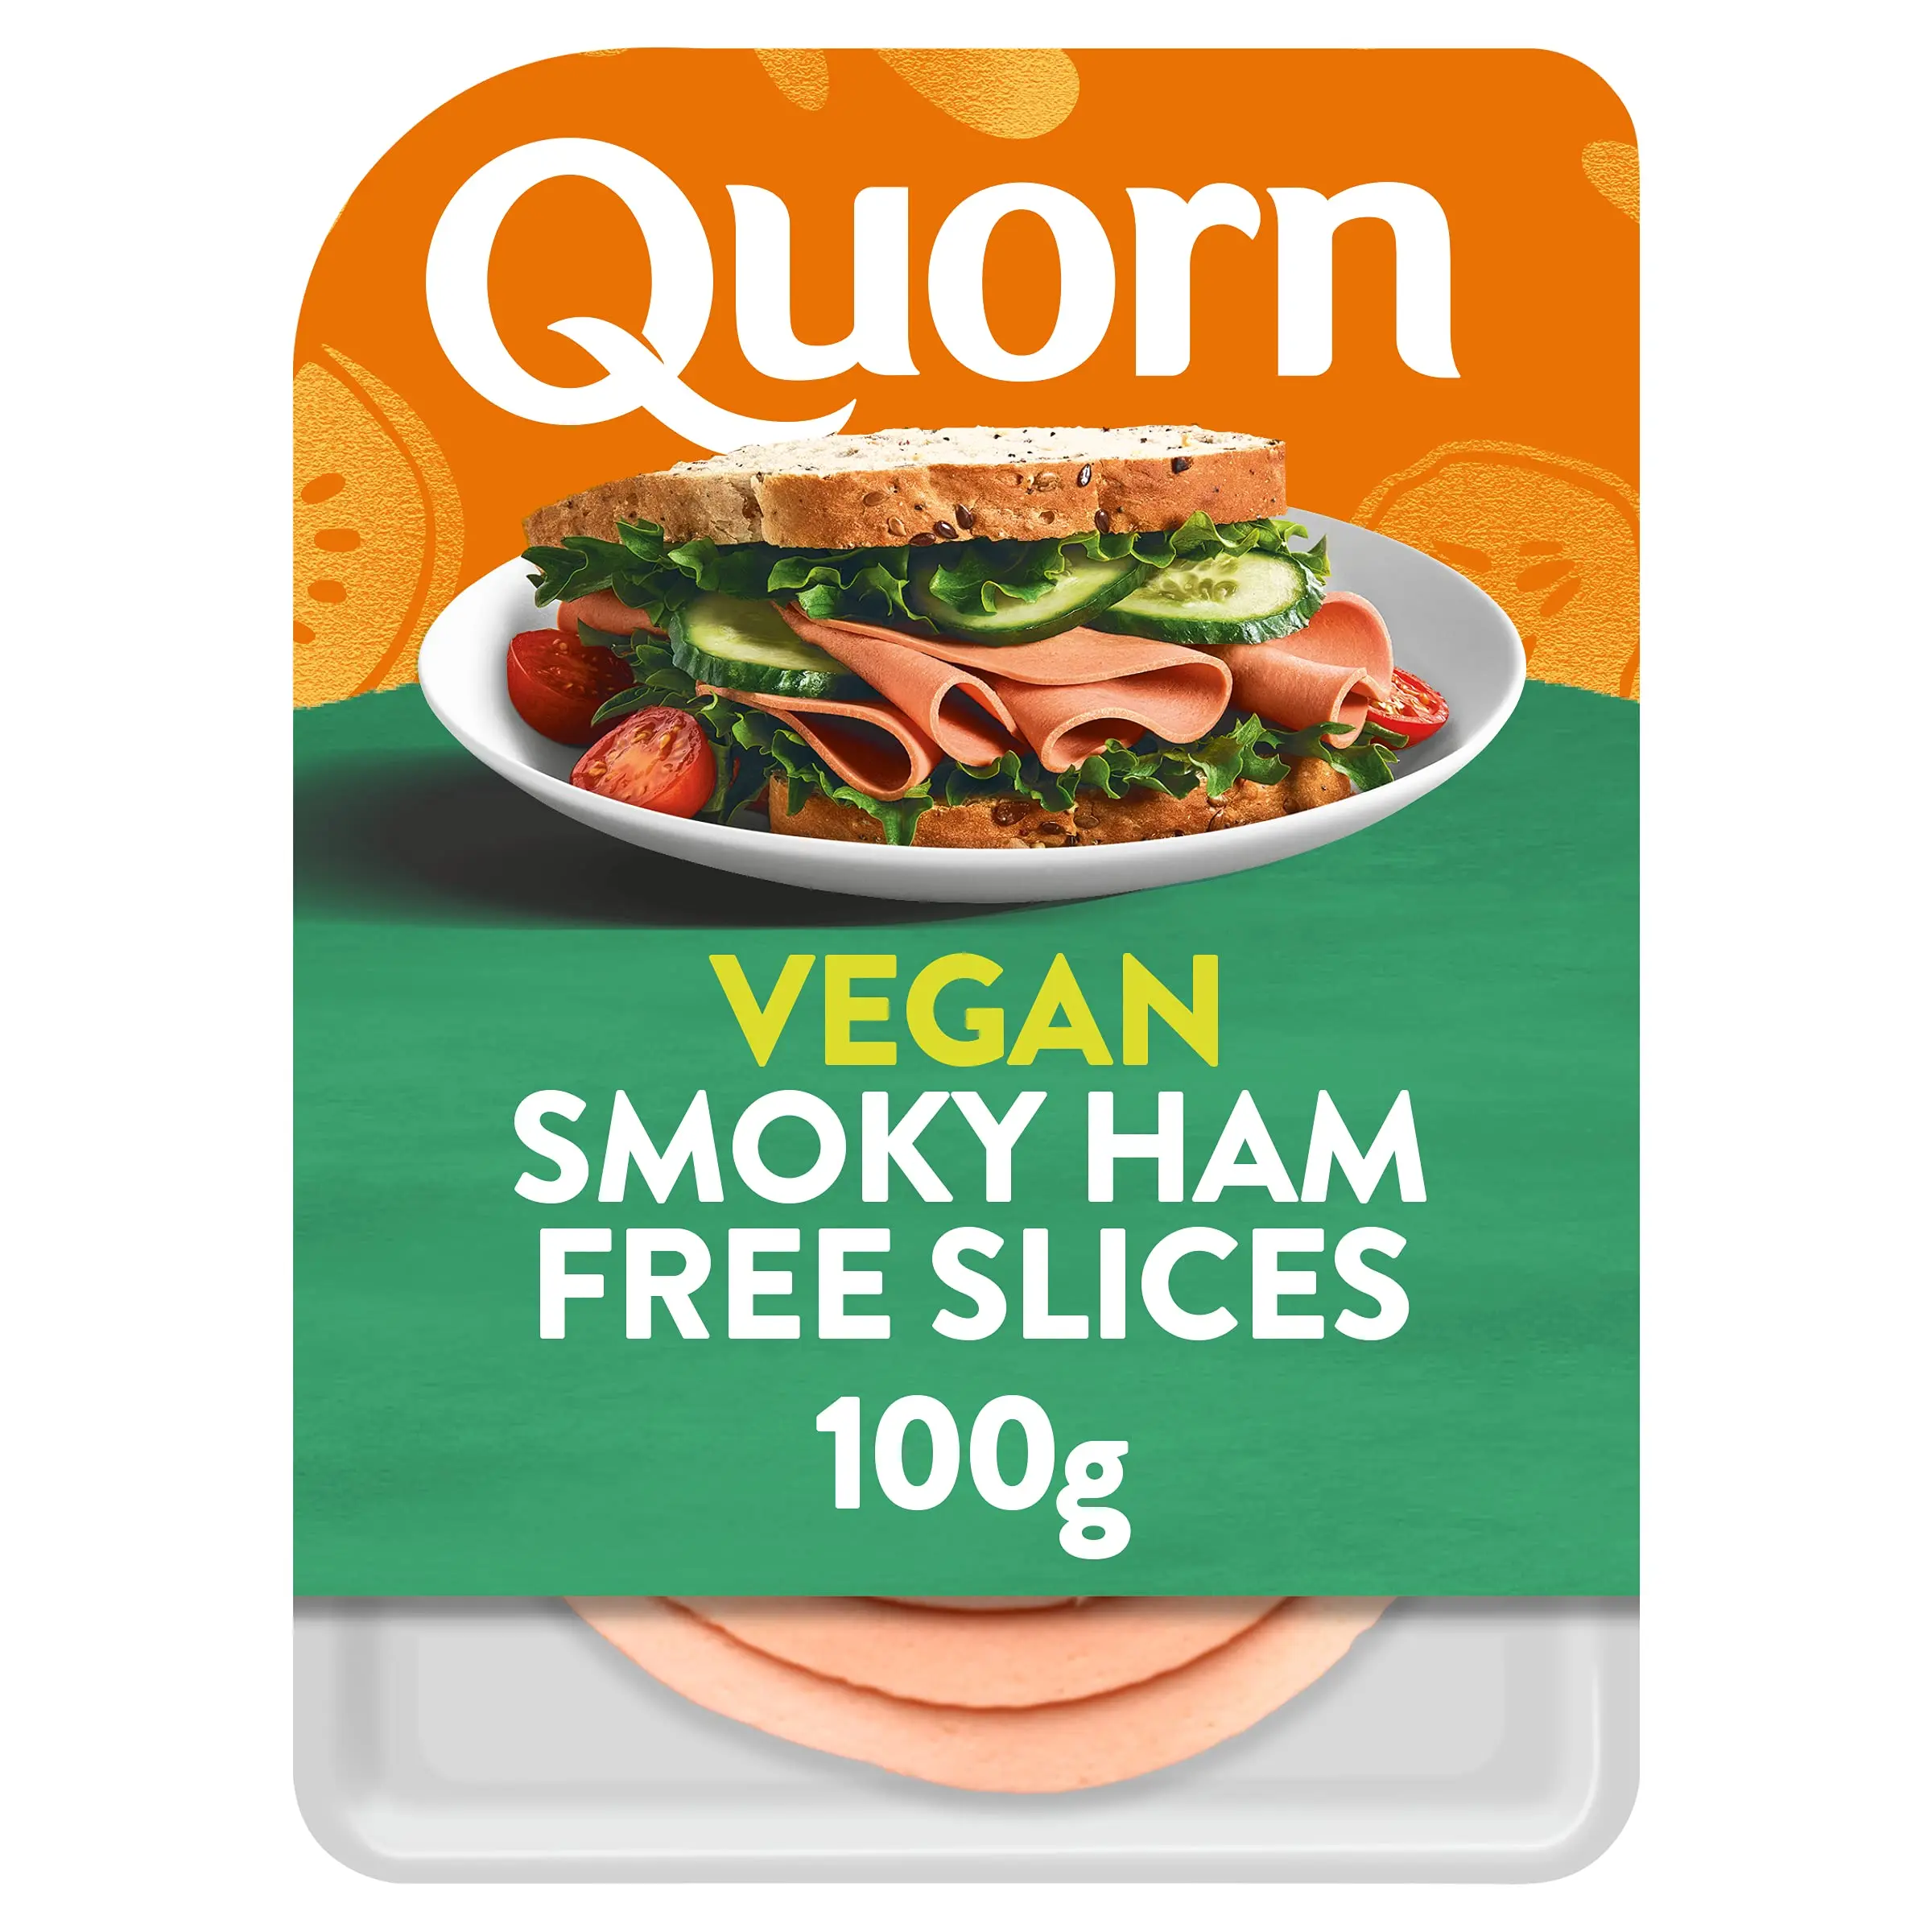 quorn smoked ham - What is Quorn ham made of